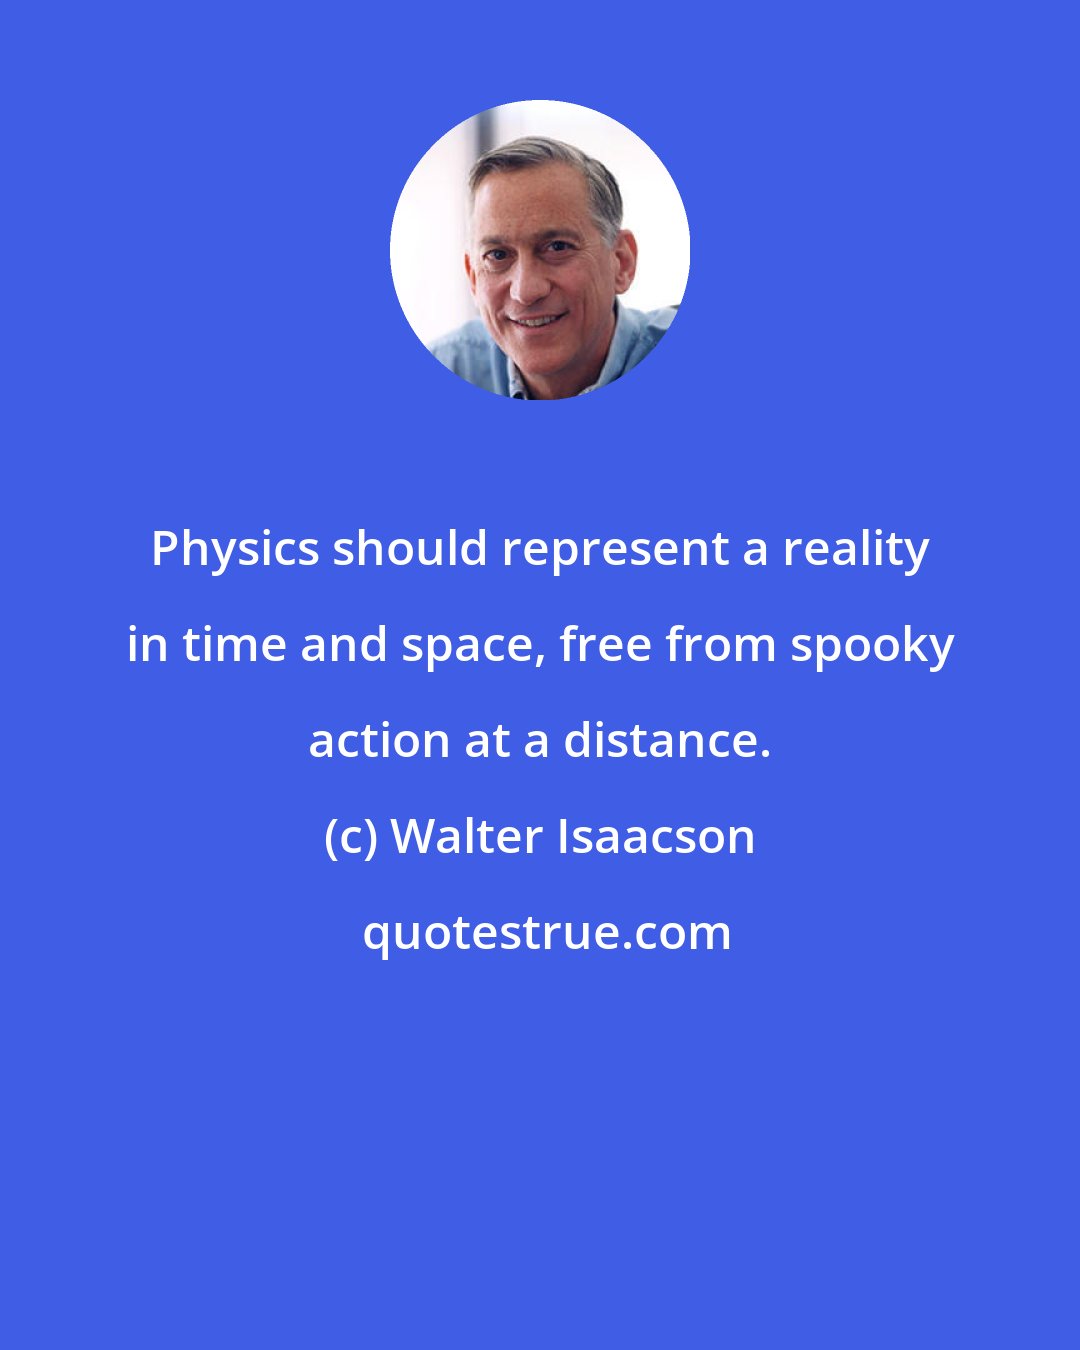 Walter Isaacson: Physics should represent a reality in time and space, free from spooky action at a distance.